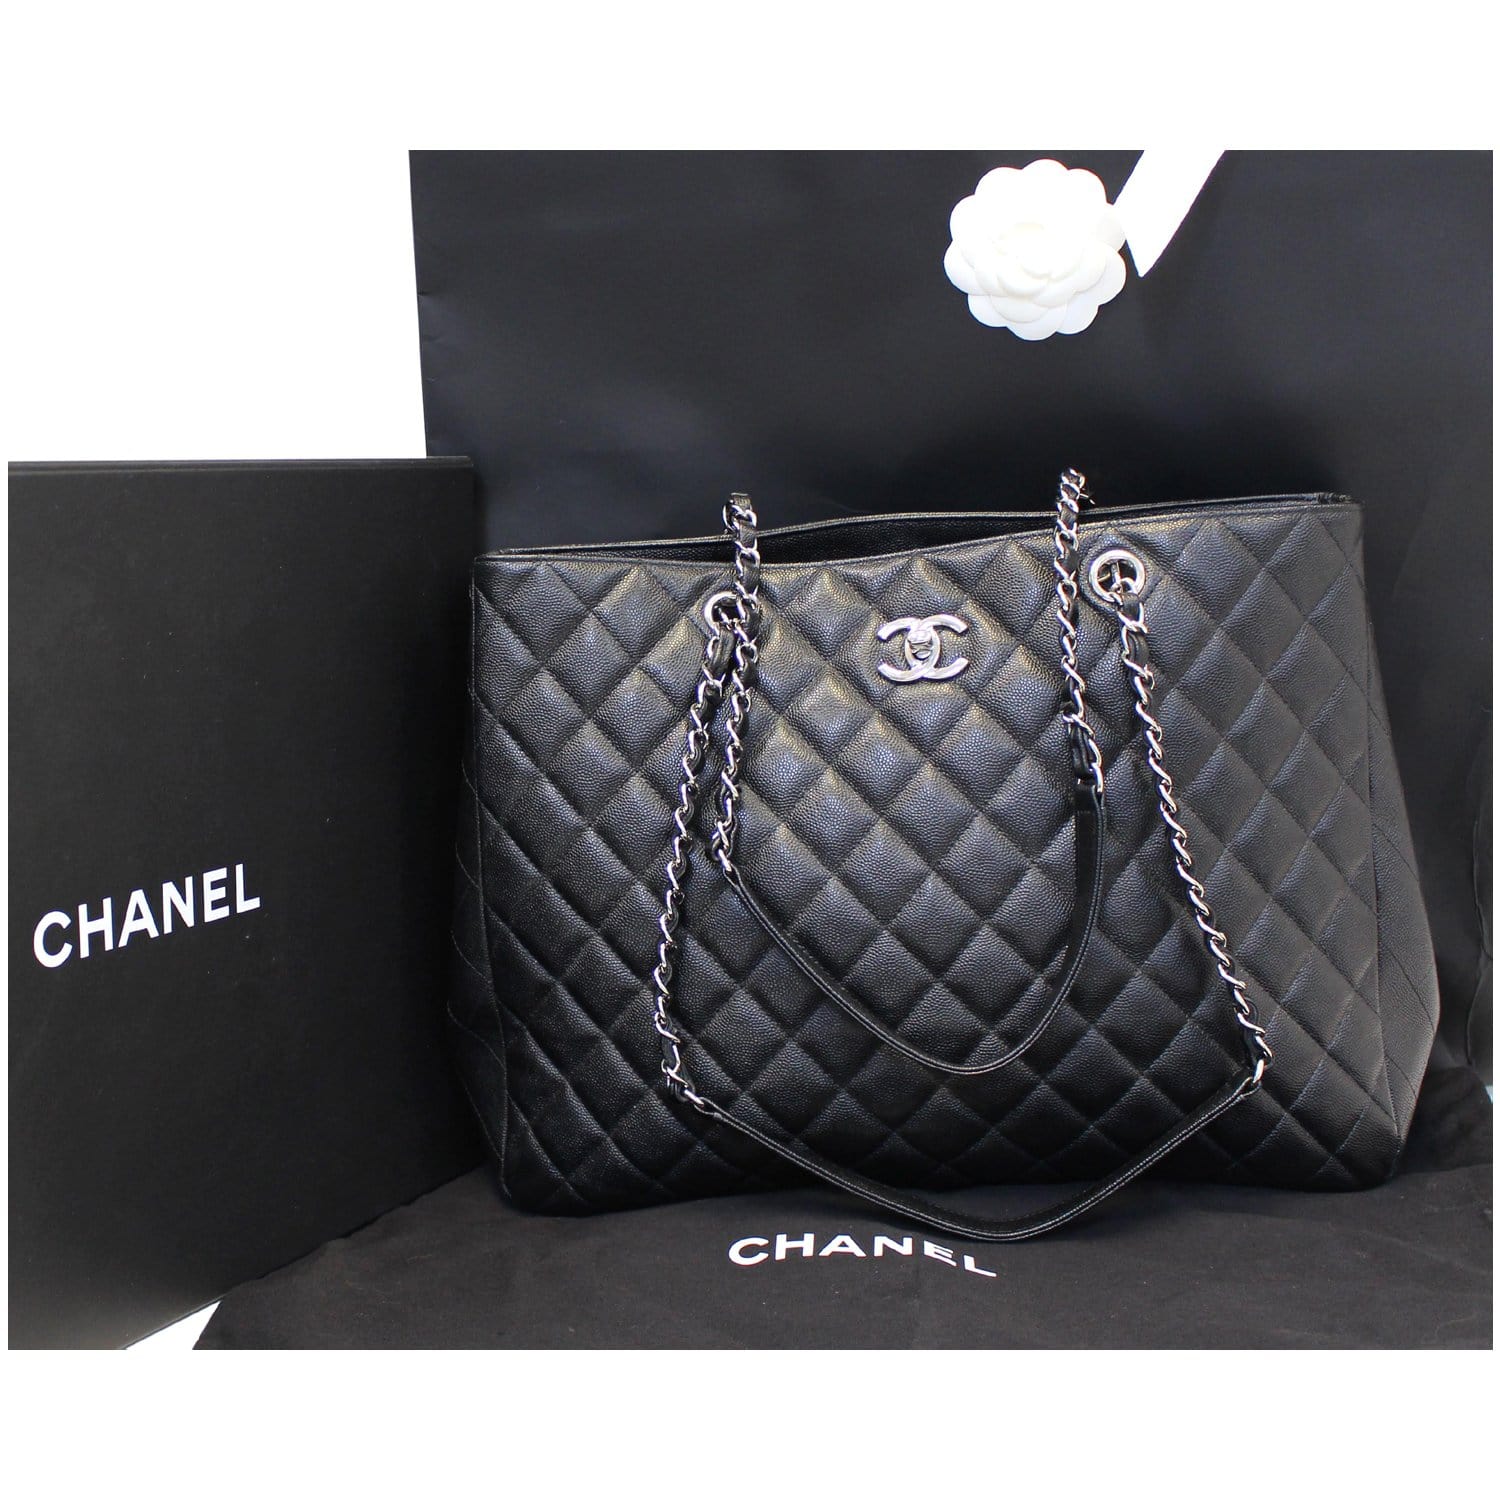 CHANEL Large Classic Caviar Leather Tote Bag